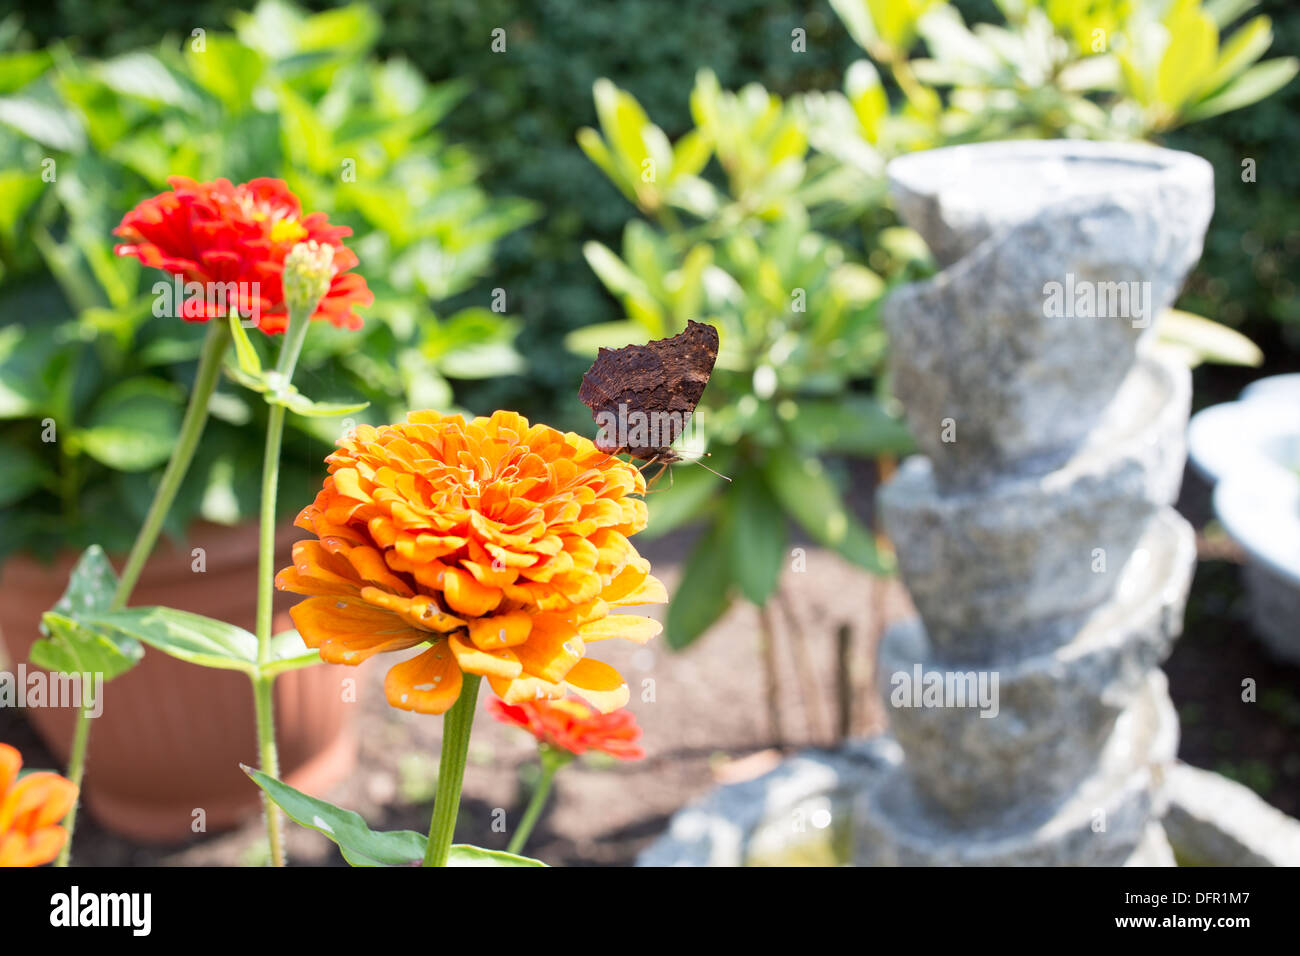 Butterfly preying on flowers in the garden. Stock Photo